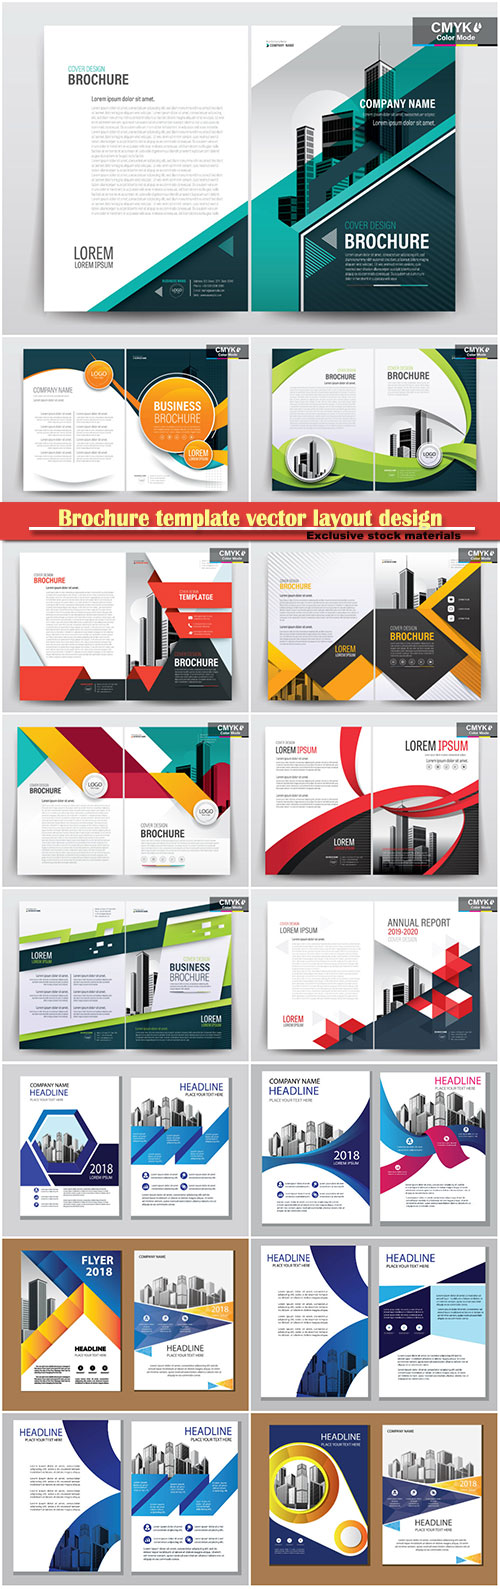 Brochure template vector layout design, corporate business annual report, magazine, flyer mockup # 151